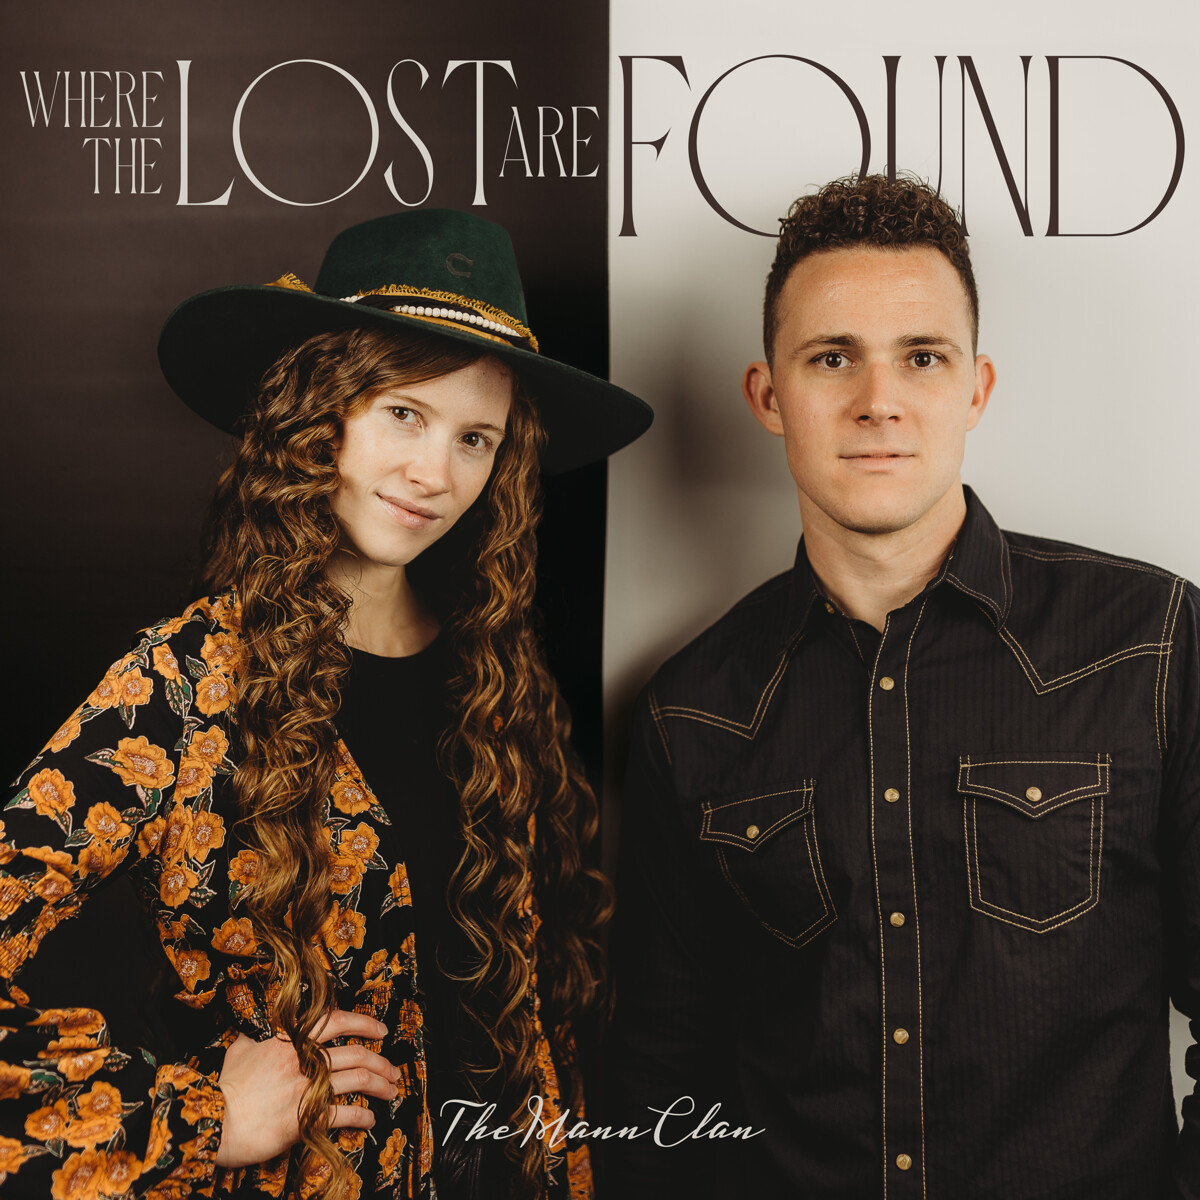 Where the Lost Are Found - CD